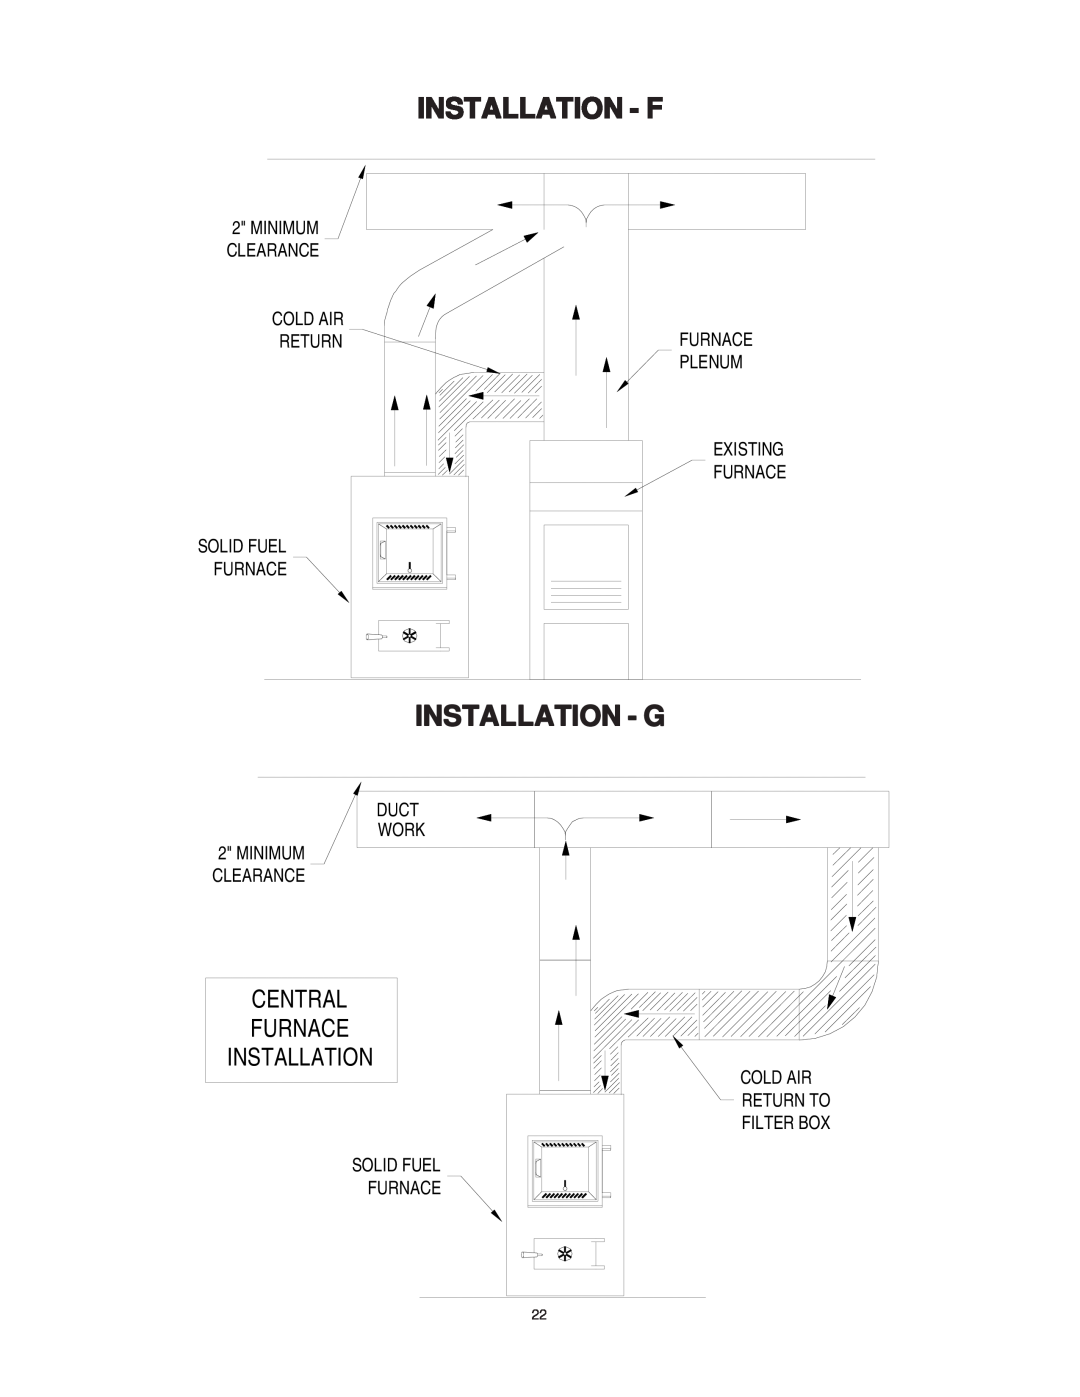 United States Stove 1537M owner manual Installation - F, Installation - G, Central Furnace Installation, Solid Fuel Furnace 